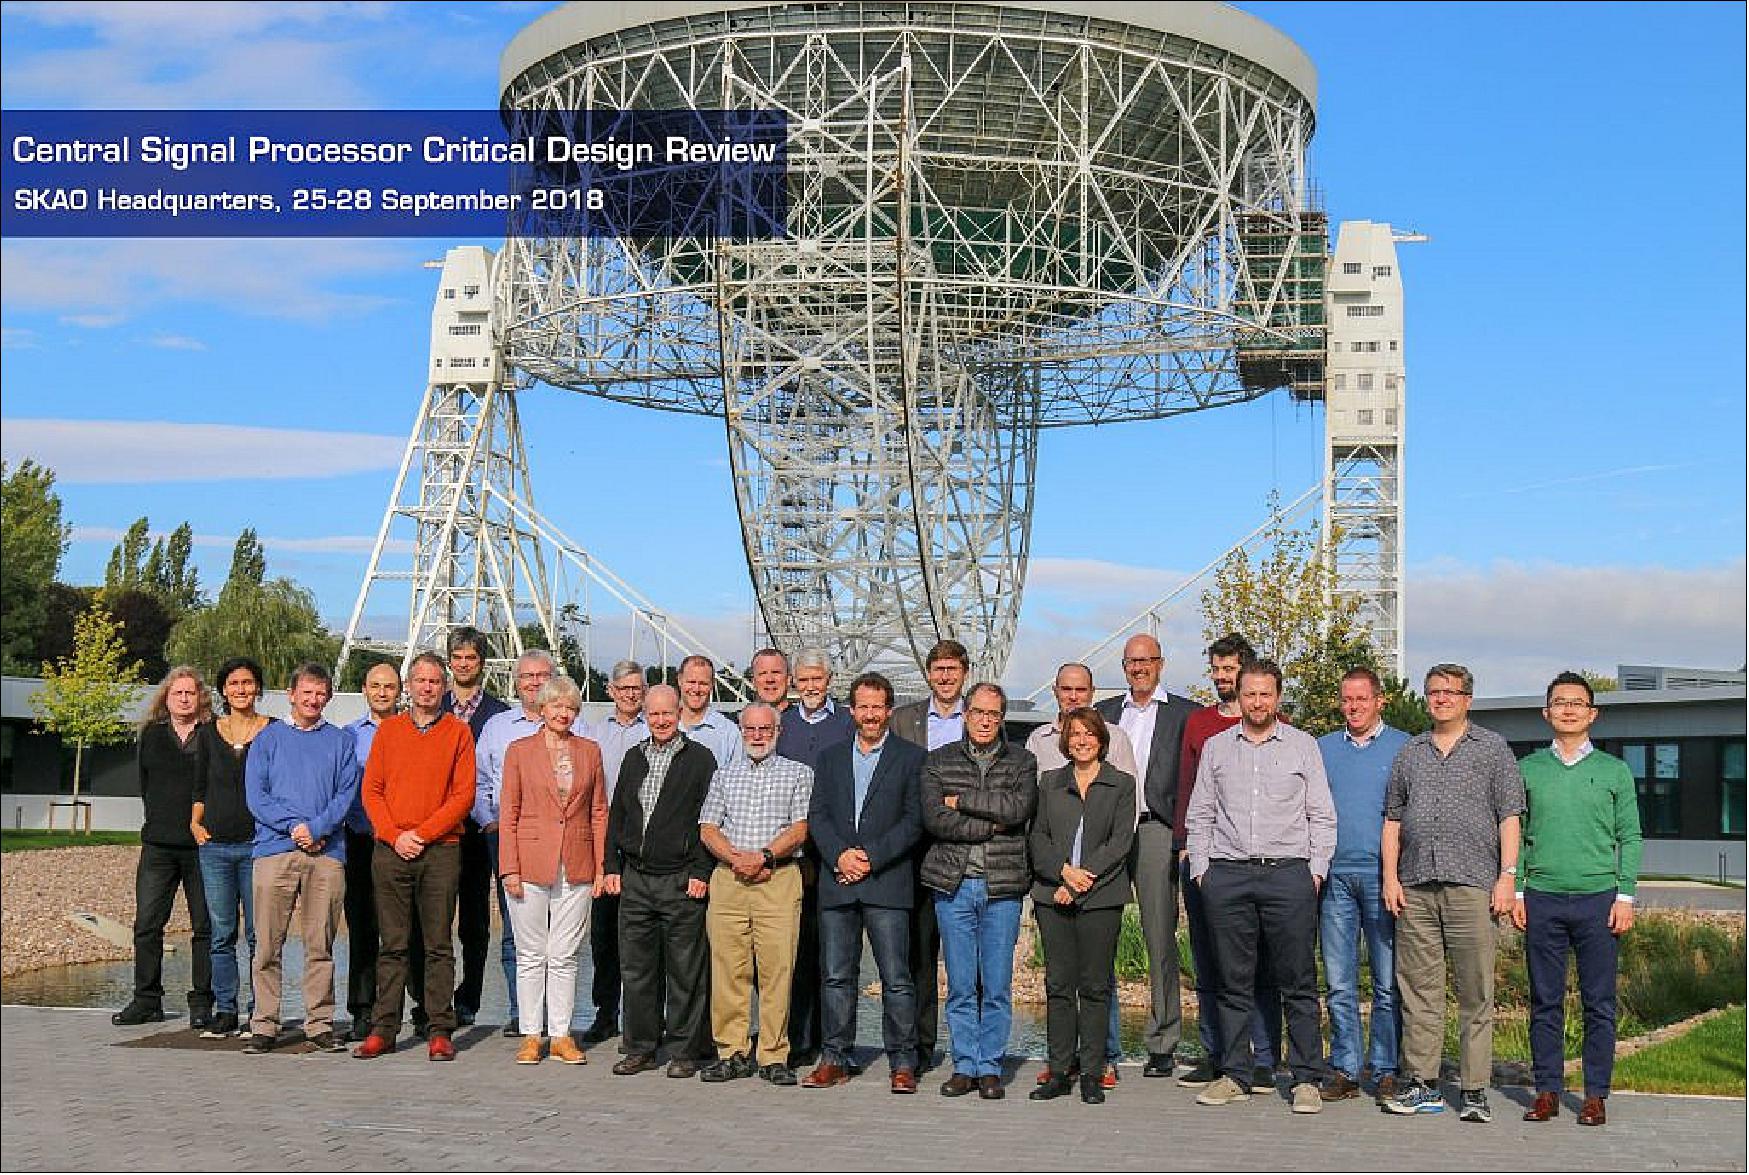 Figure 27: Members of the Central Signal Processor consortium at SKA Global Headquarters during the Critical Design Review in September 2018 (image credit: SKA Organization)